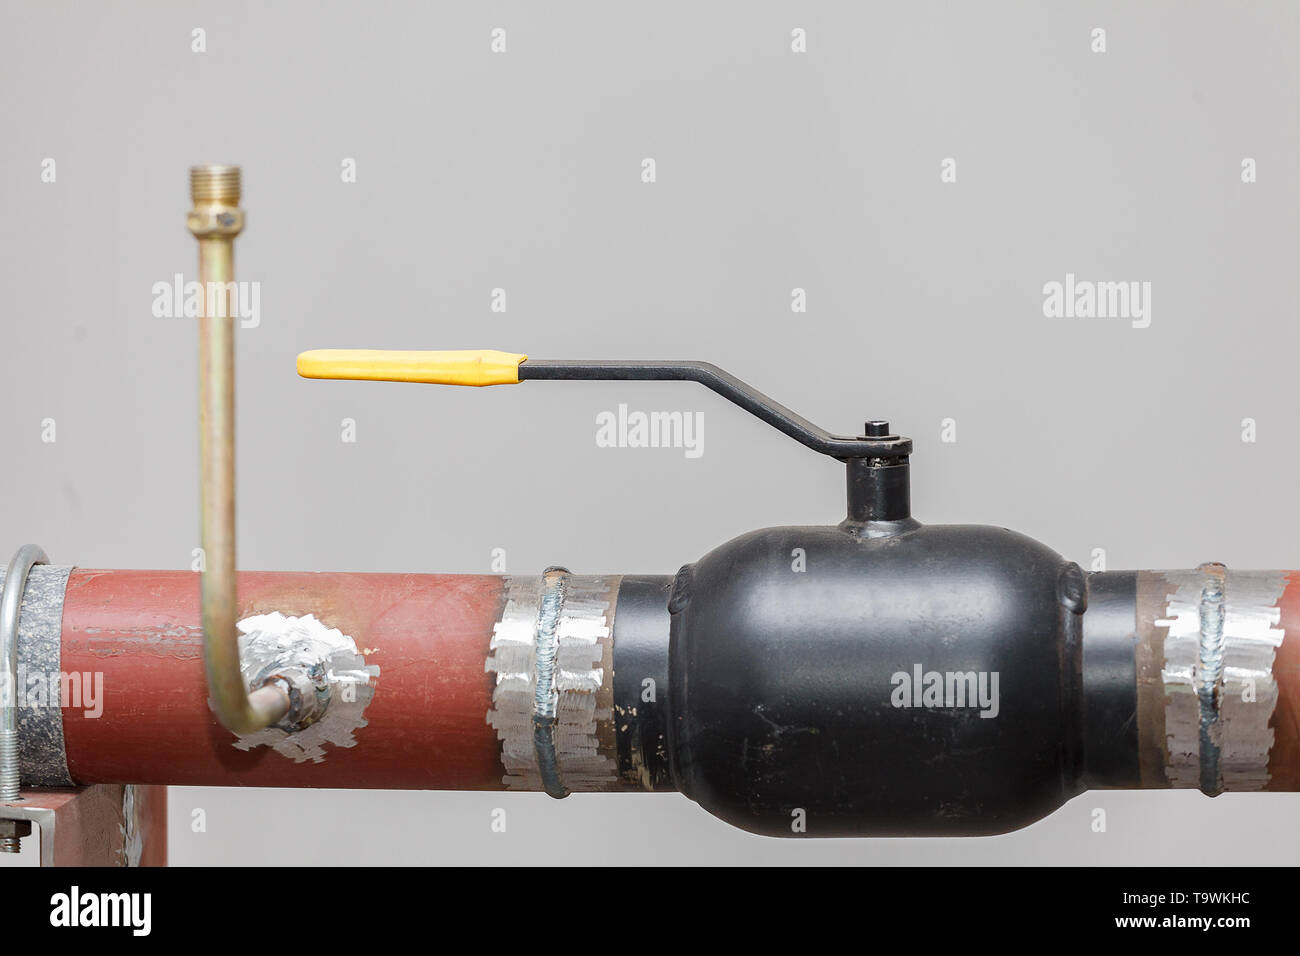 A heating system unit against a gray wall. Stock Photo